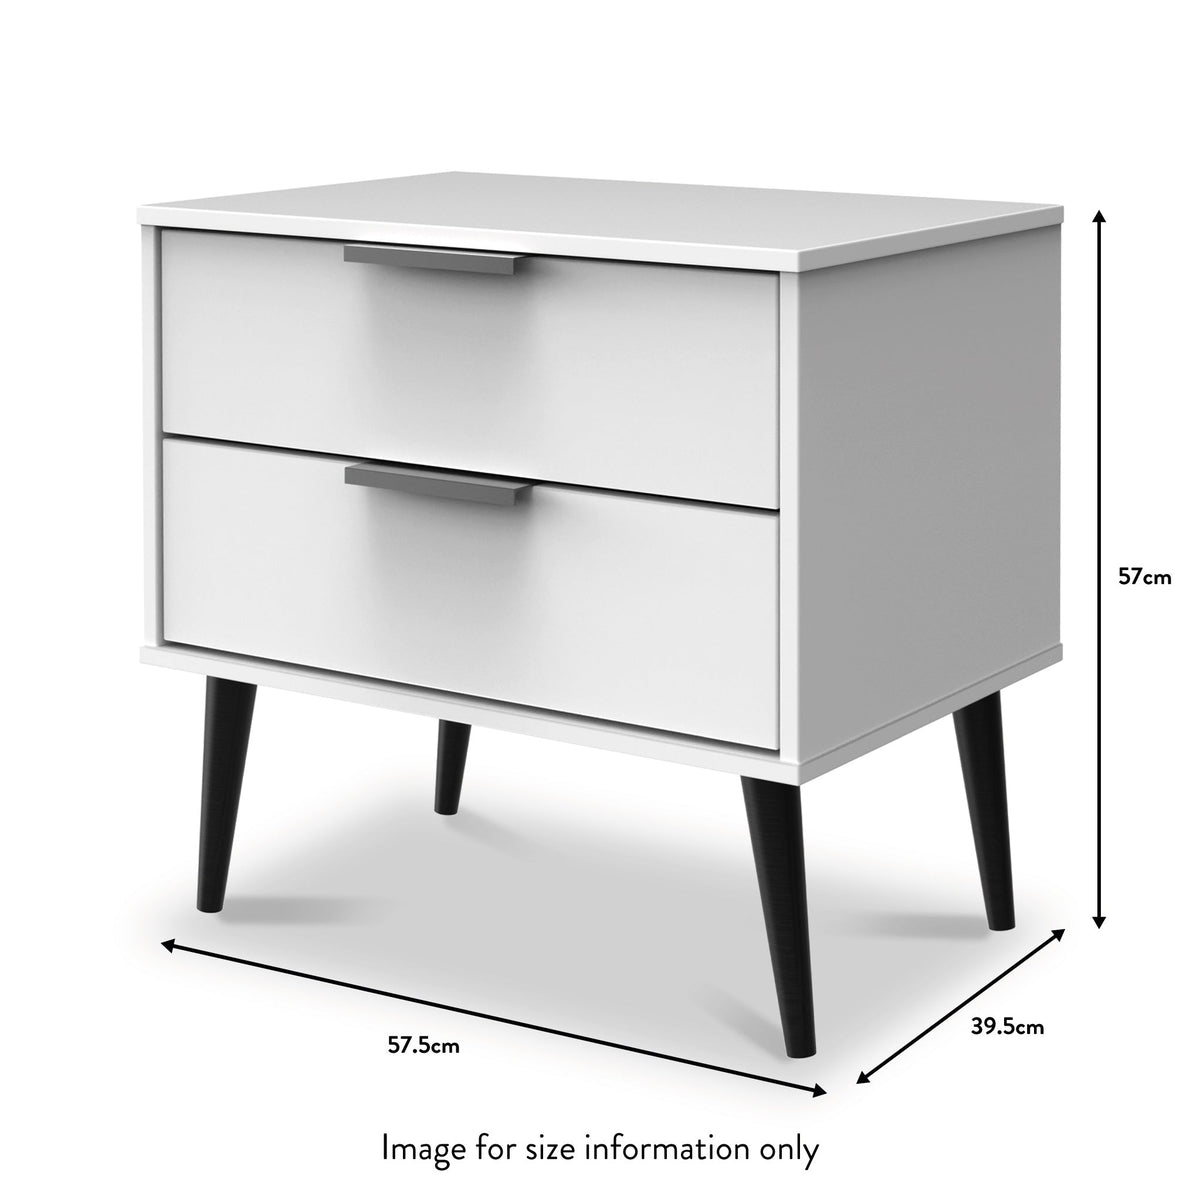 Asher White 2 Drawer Side Lamp Table dimensions